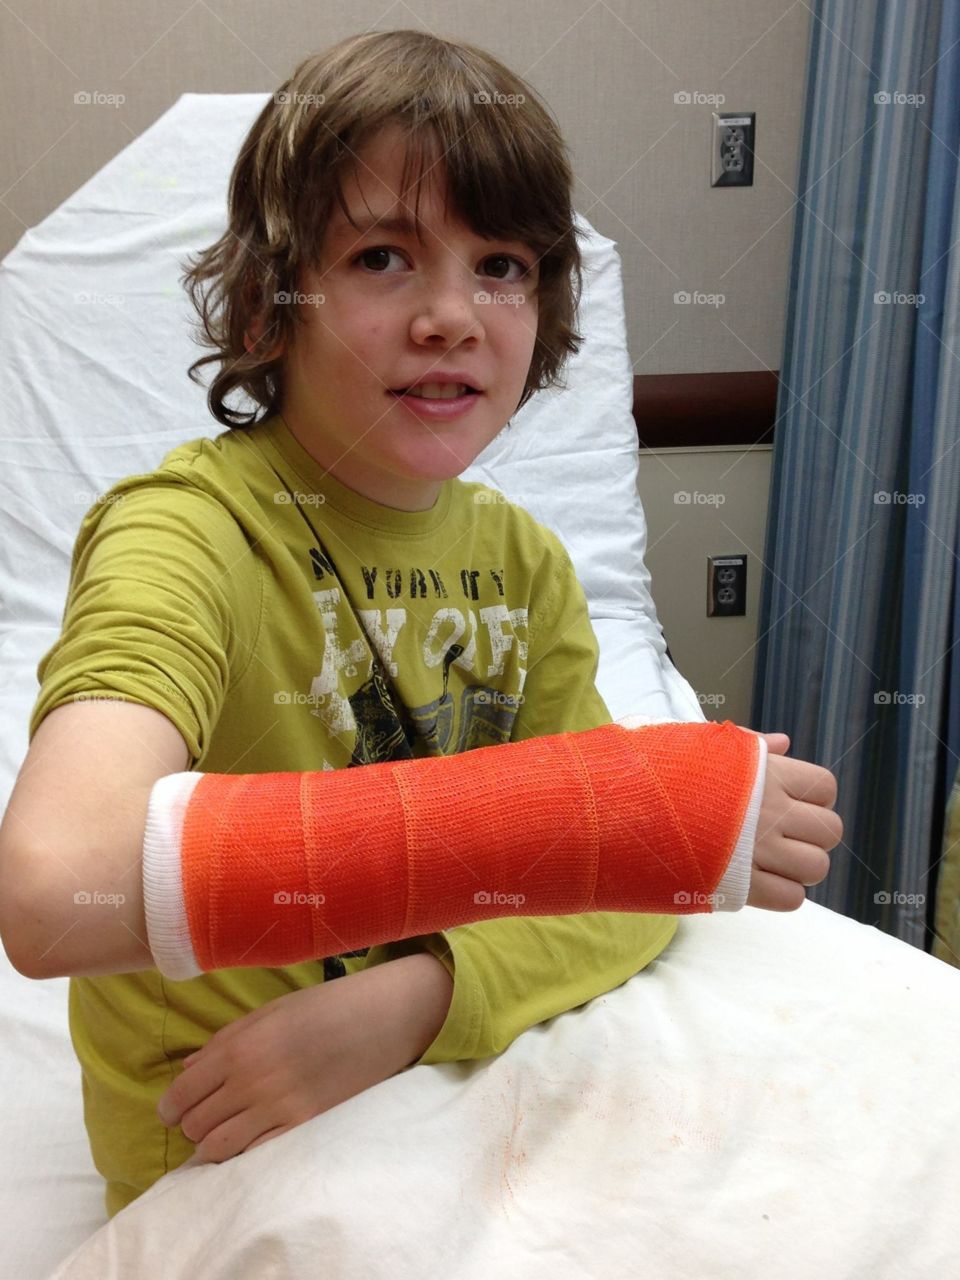 Boy with broken arm casted